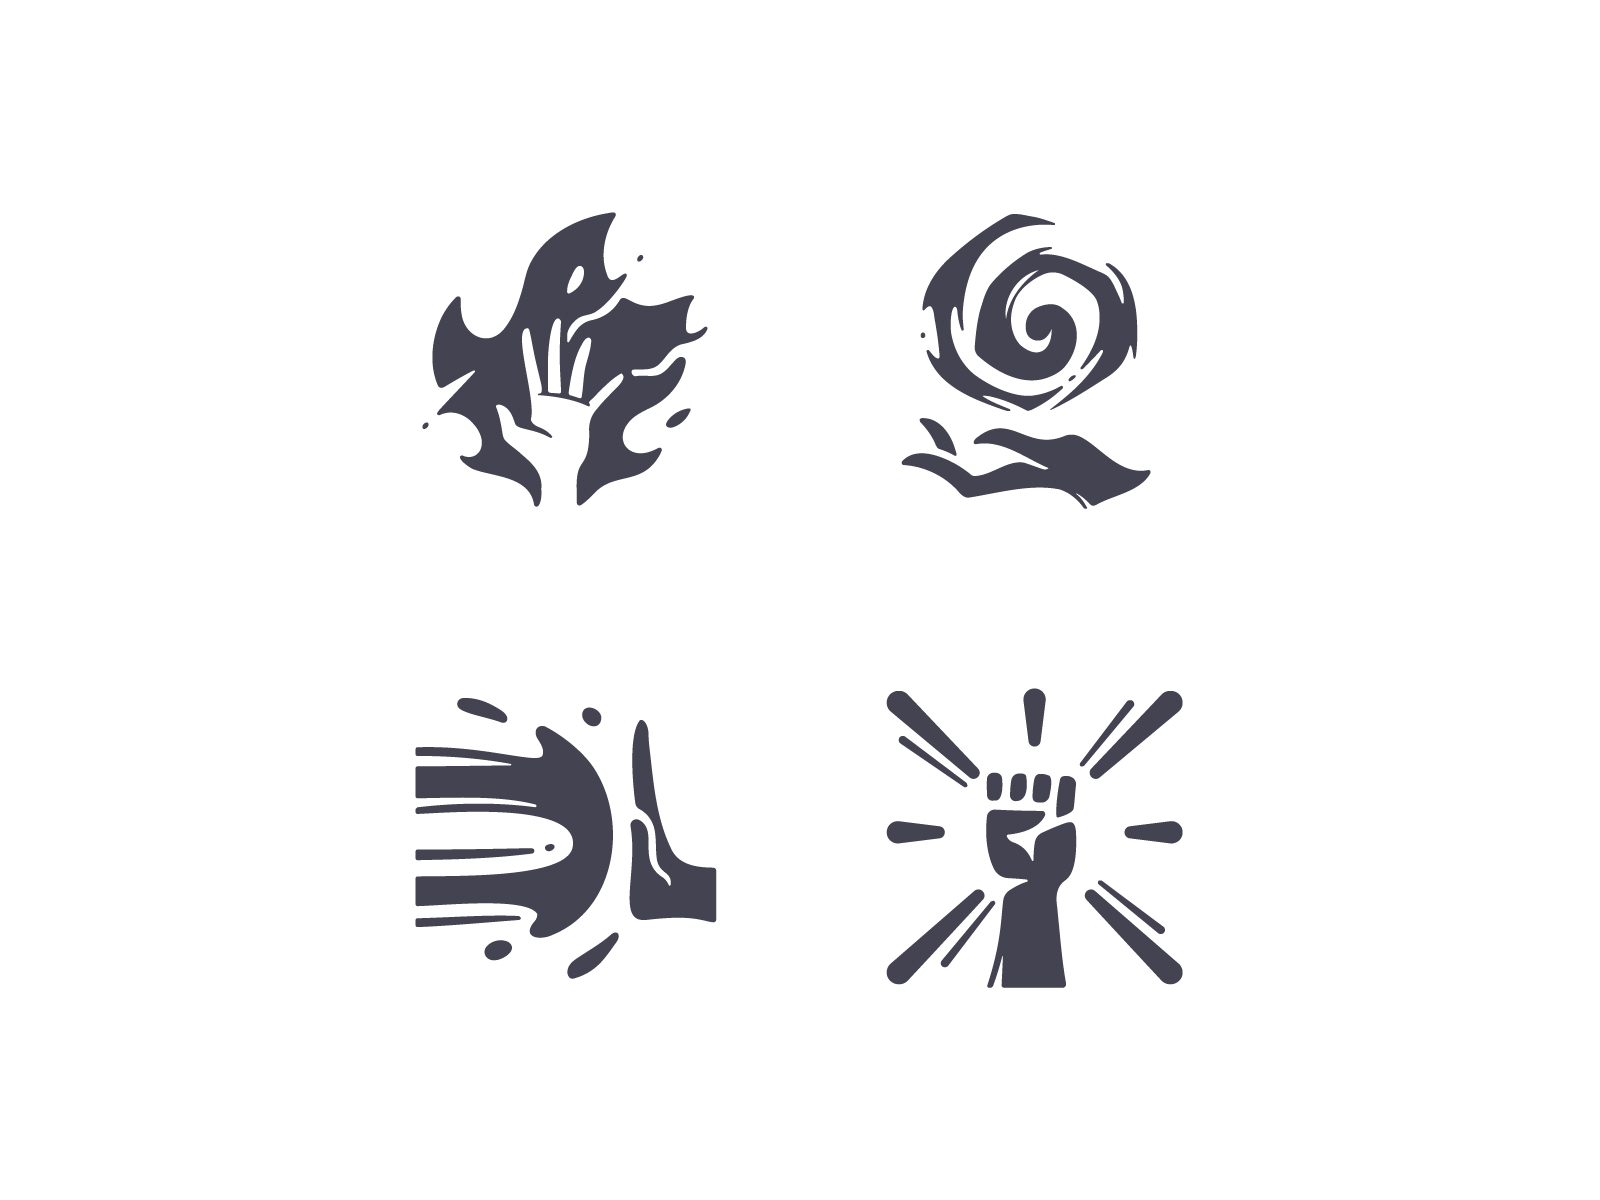 Magic hand RPG icons by maxicons on Dribbble